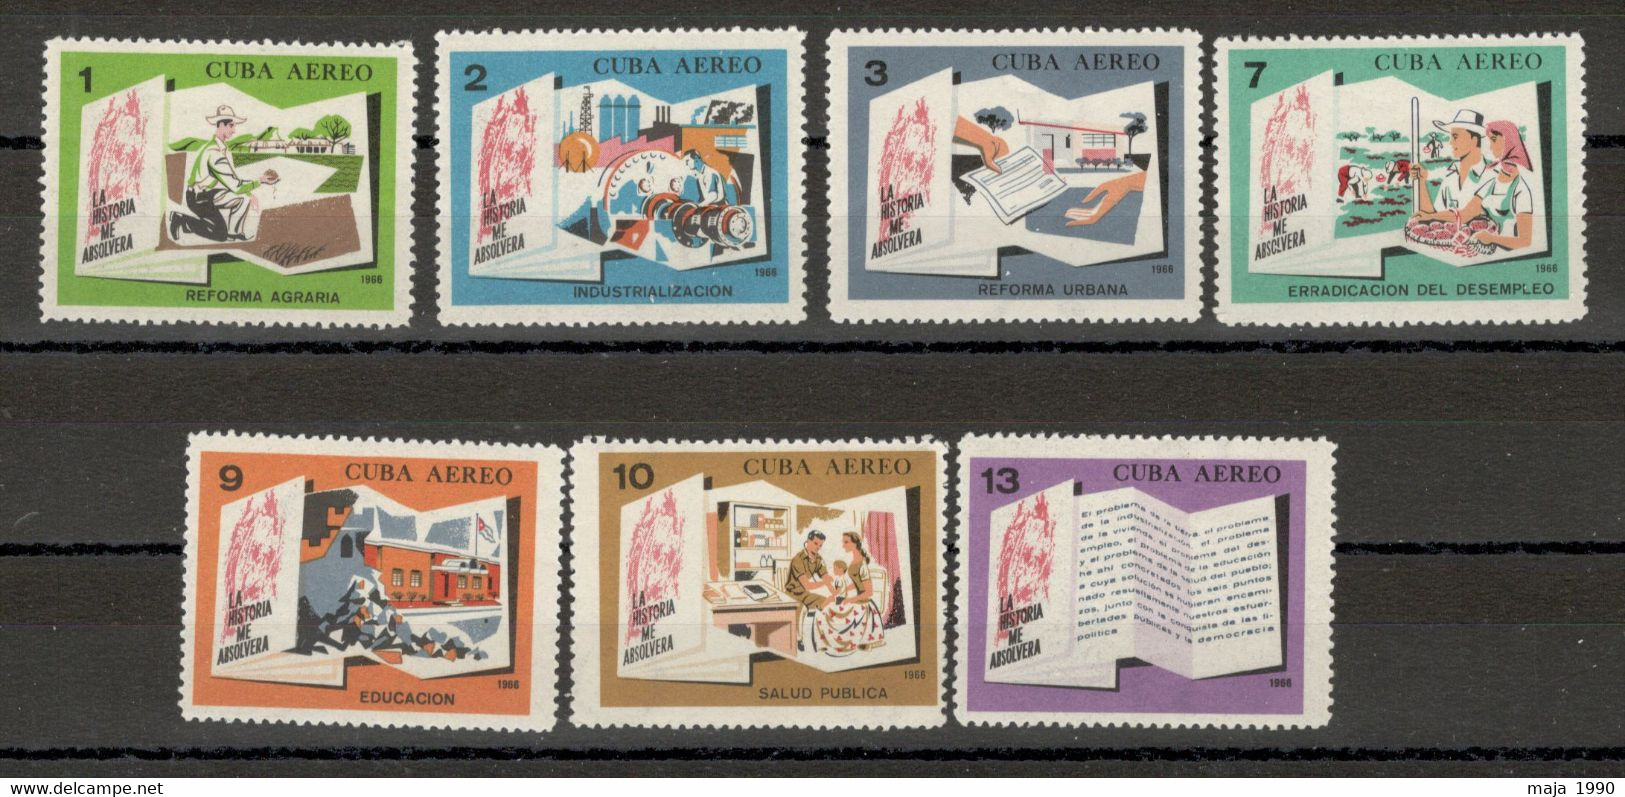 CUBA - MNH SET - INDUSTRY - AGRICULTURE - EDUCATION - 1968. - Neufs